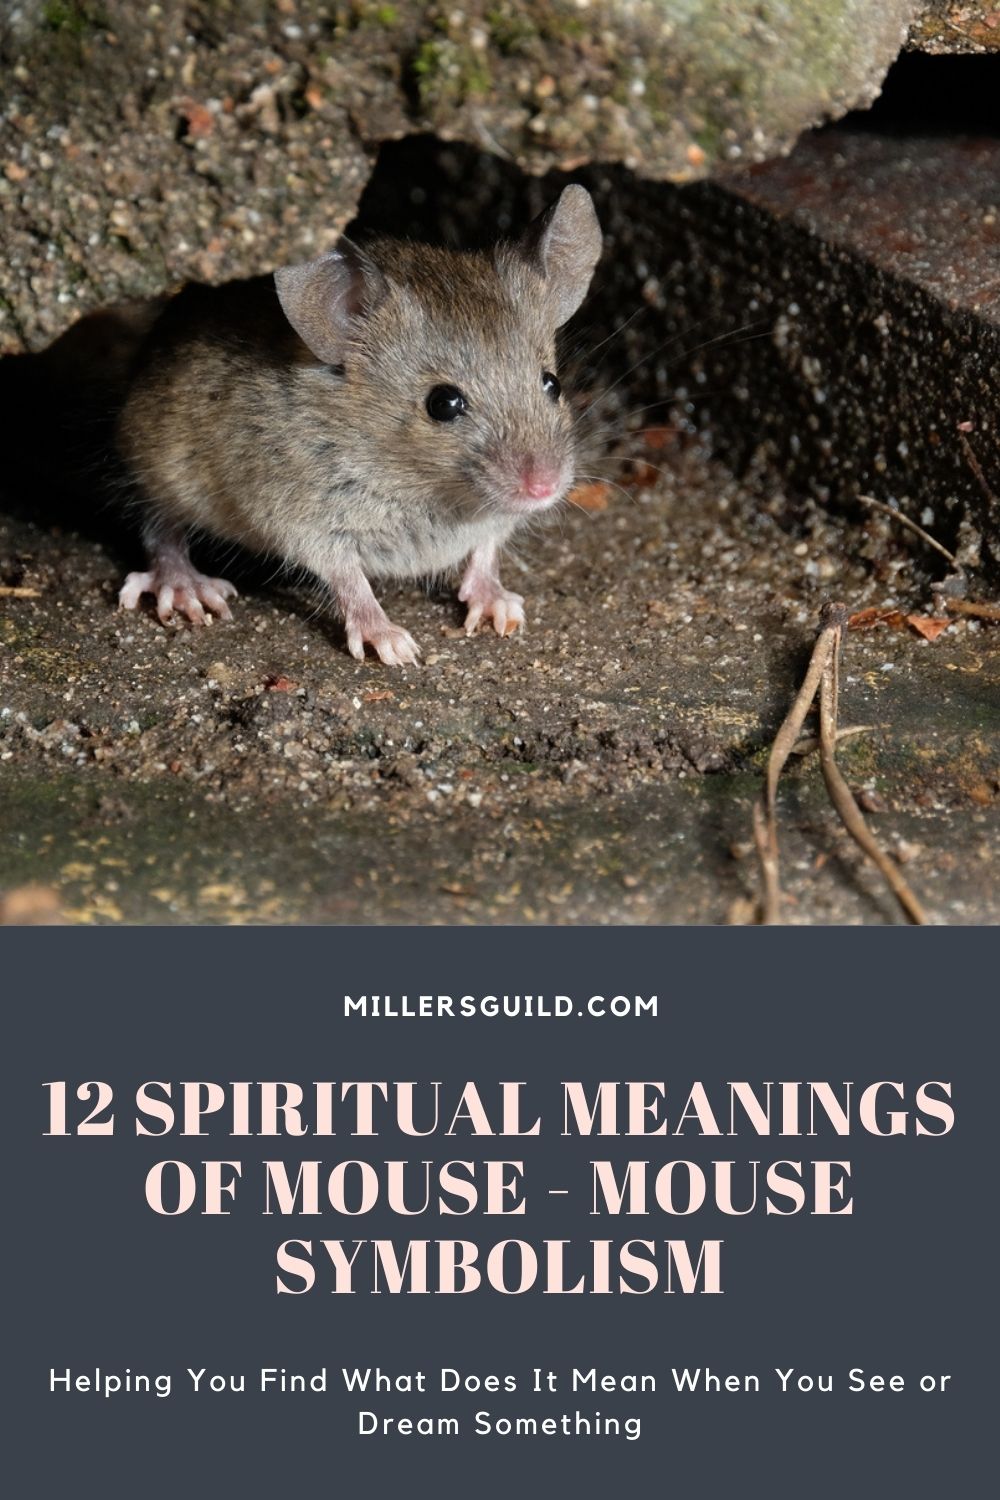 12 Spiritual Meanings of Mouse - Mouse Symbolism